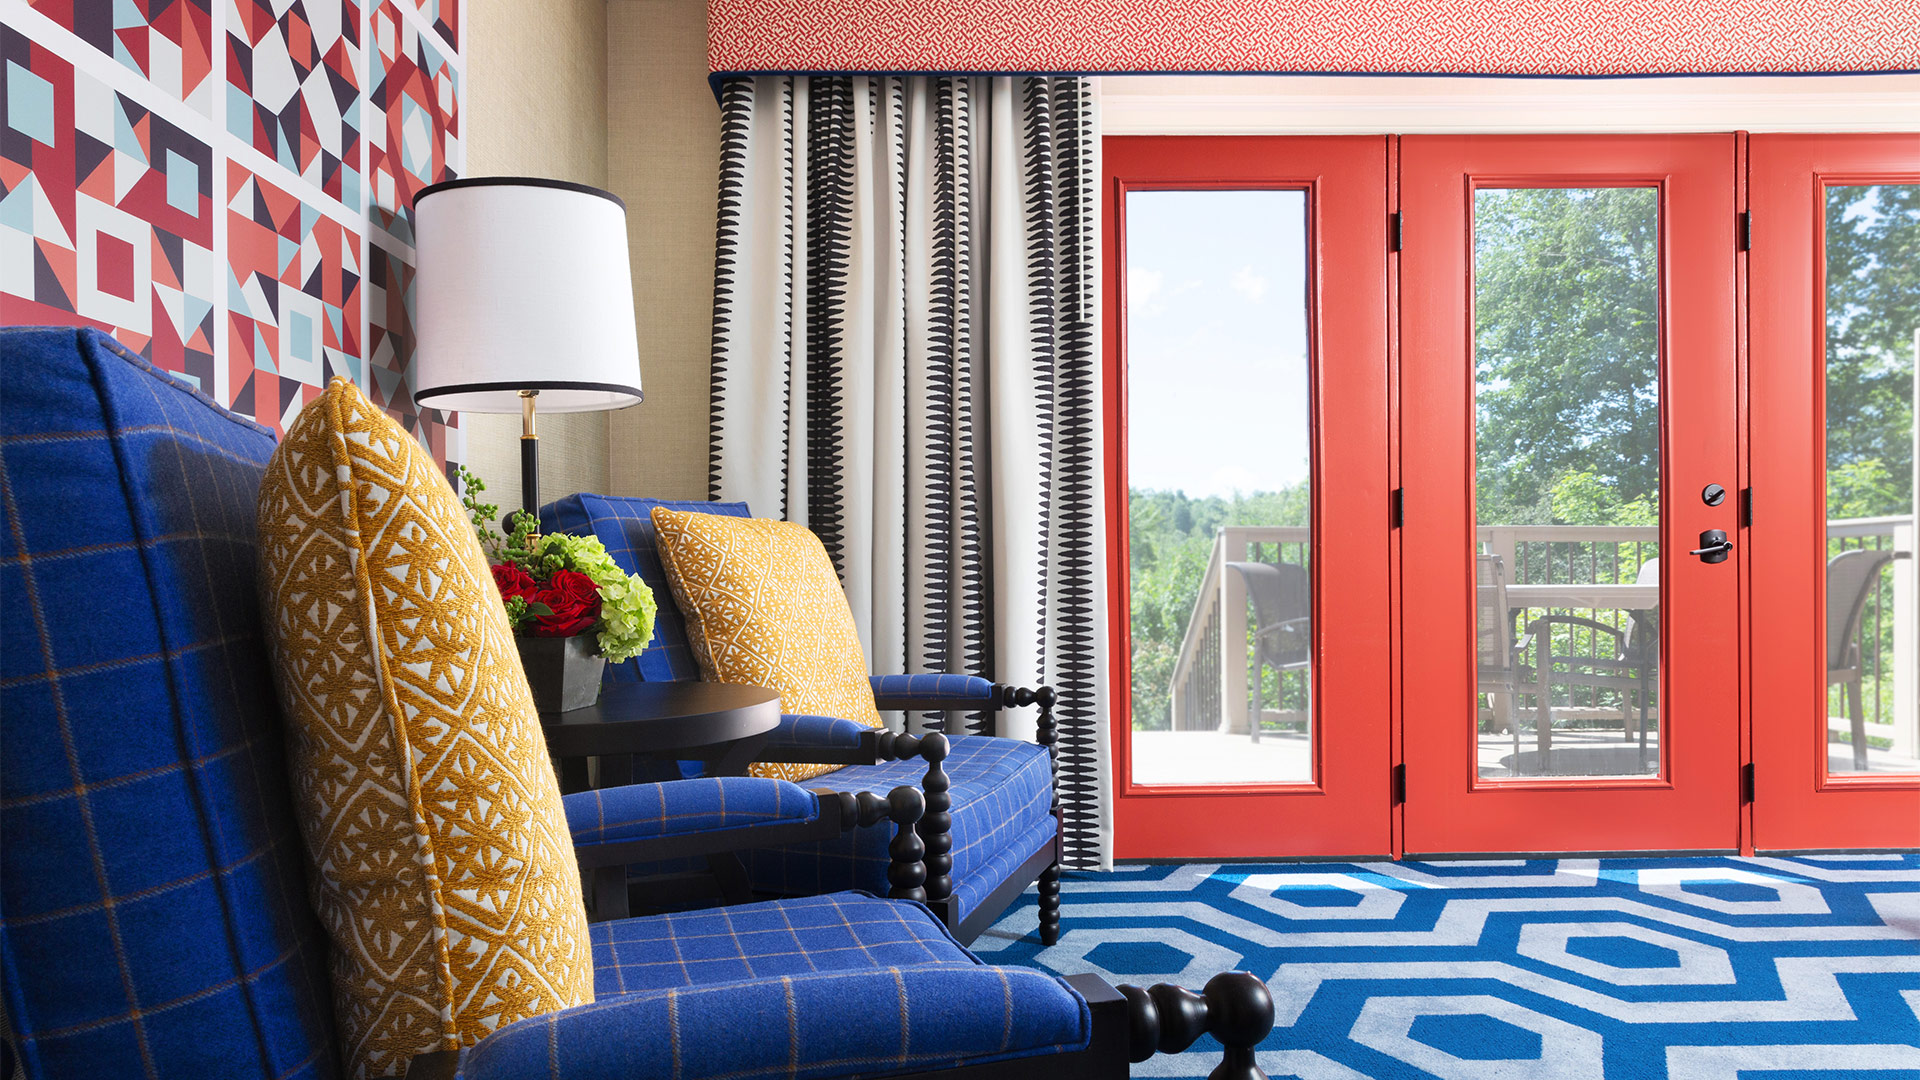 interior shot of a Washington townhome sitting area. There is a blue geometric rug, two blue chairs with yellow pillows. The room has red accents along the door and in some artwork behind the chairs.